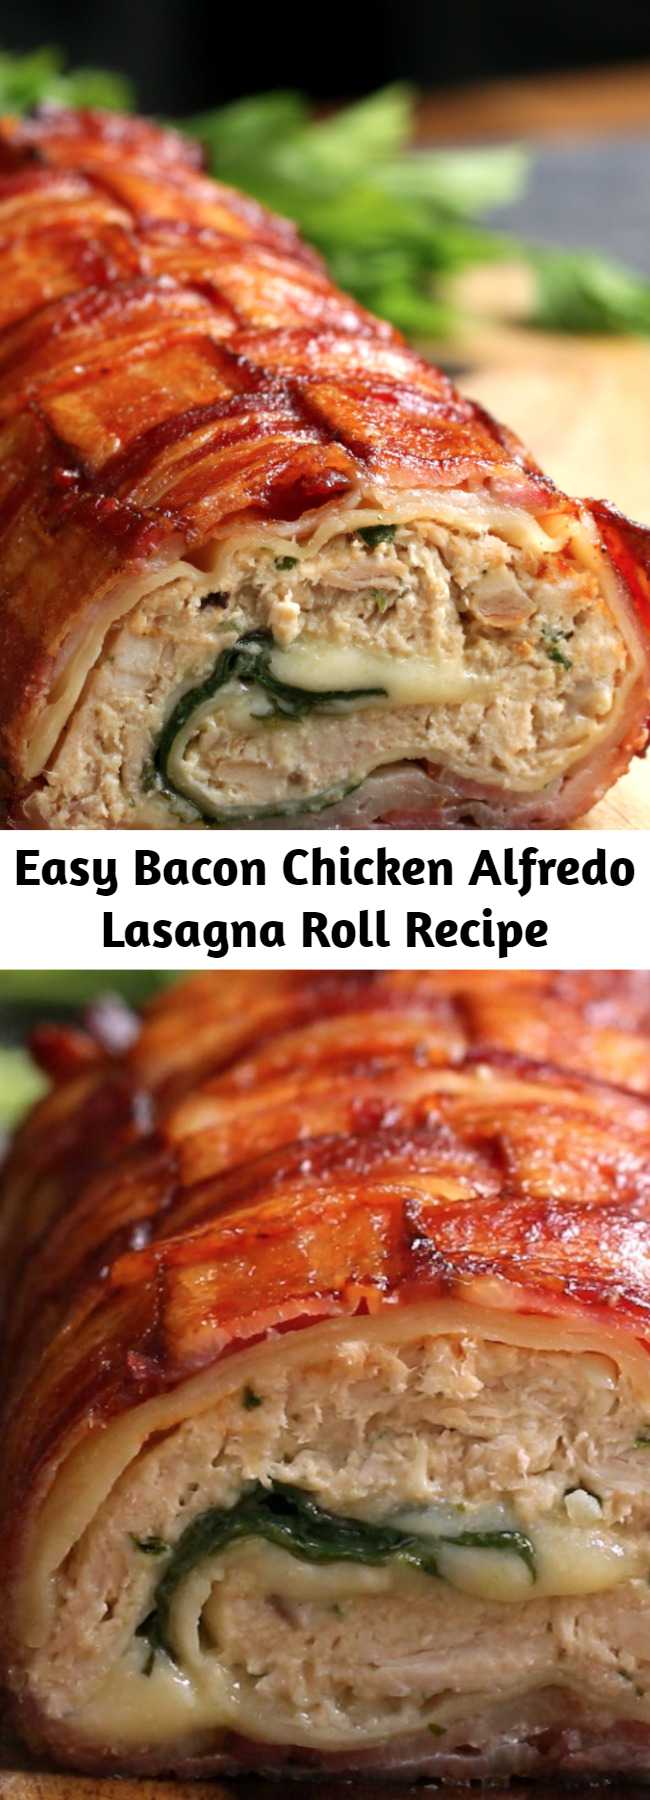 Easy Bacon Chicken Alfredo Lasagna Roll Recipe - Family fav added to weekly suppers!!! Incredibly easy and flavorful! Can almost knock out two dinners with the rotisserie chicken... use half for this roll and the other half for chicken salad, for the next days lunch.